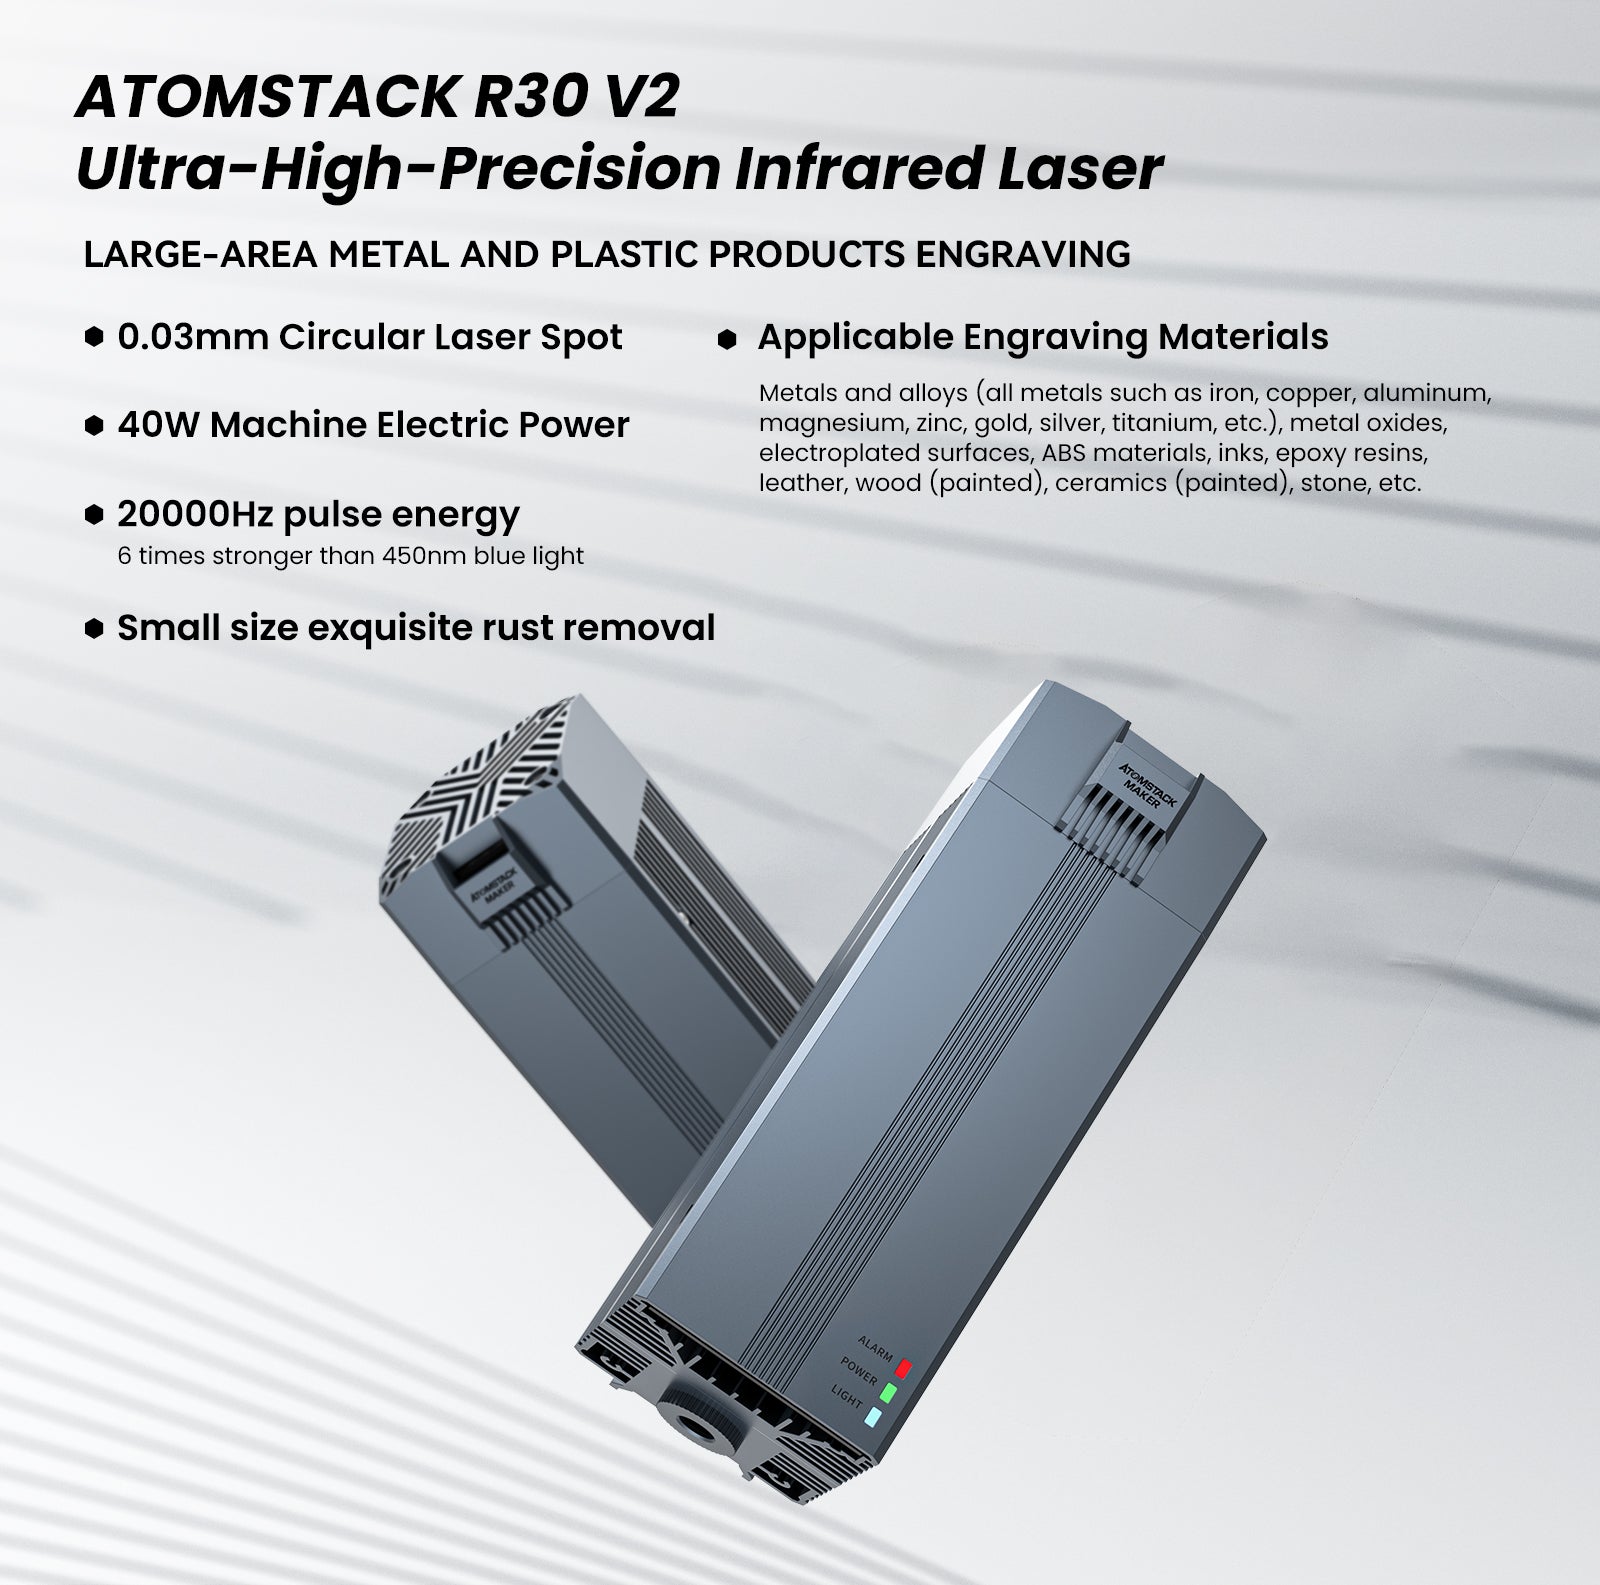 A Look at the New Atomstack R30 V2 Infrared Laser Module